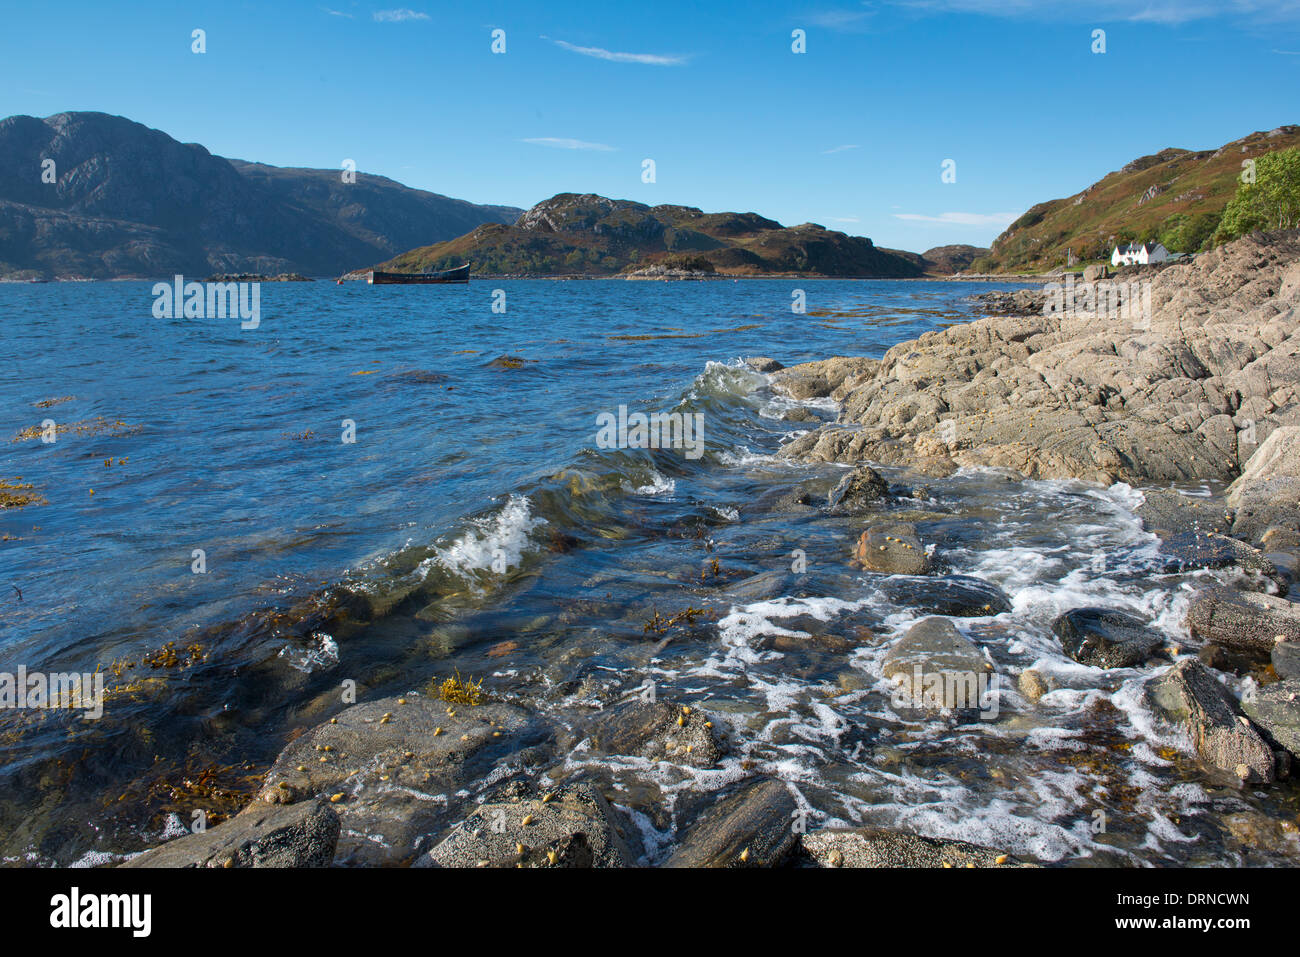 landscape of inverie bay loch nevis knoydart on the west coast of scotland with good foreground interest and a blue sky Stock Photo